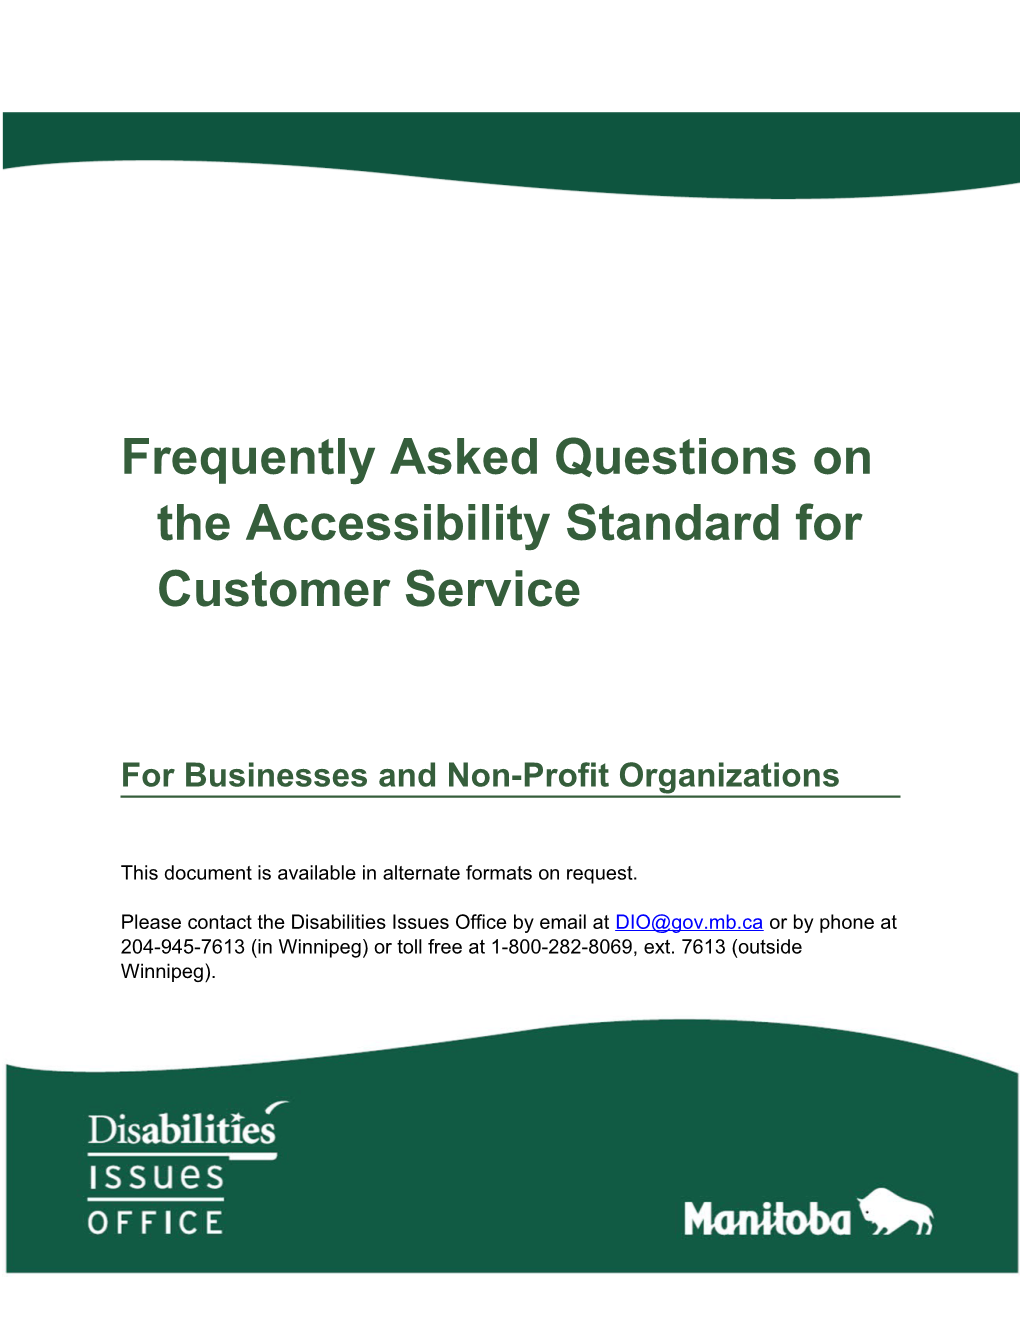 Frequently Asked Questionson the Accessibility Standard for Customer Service